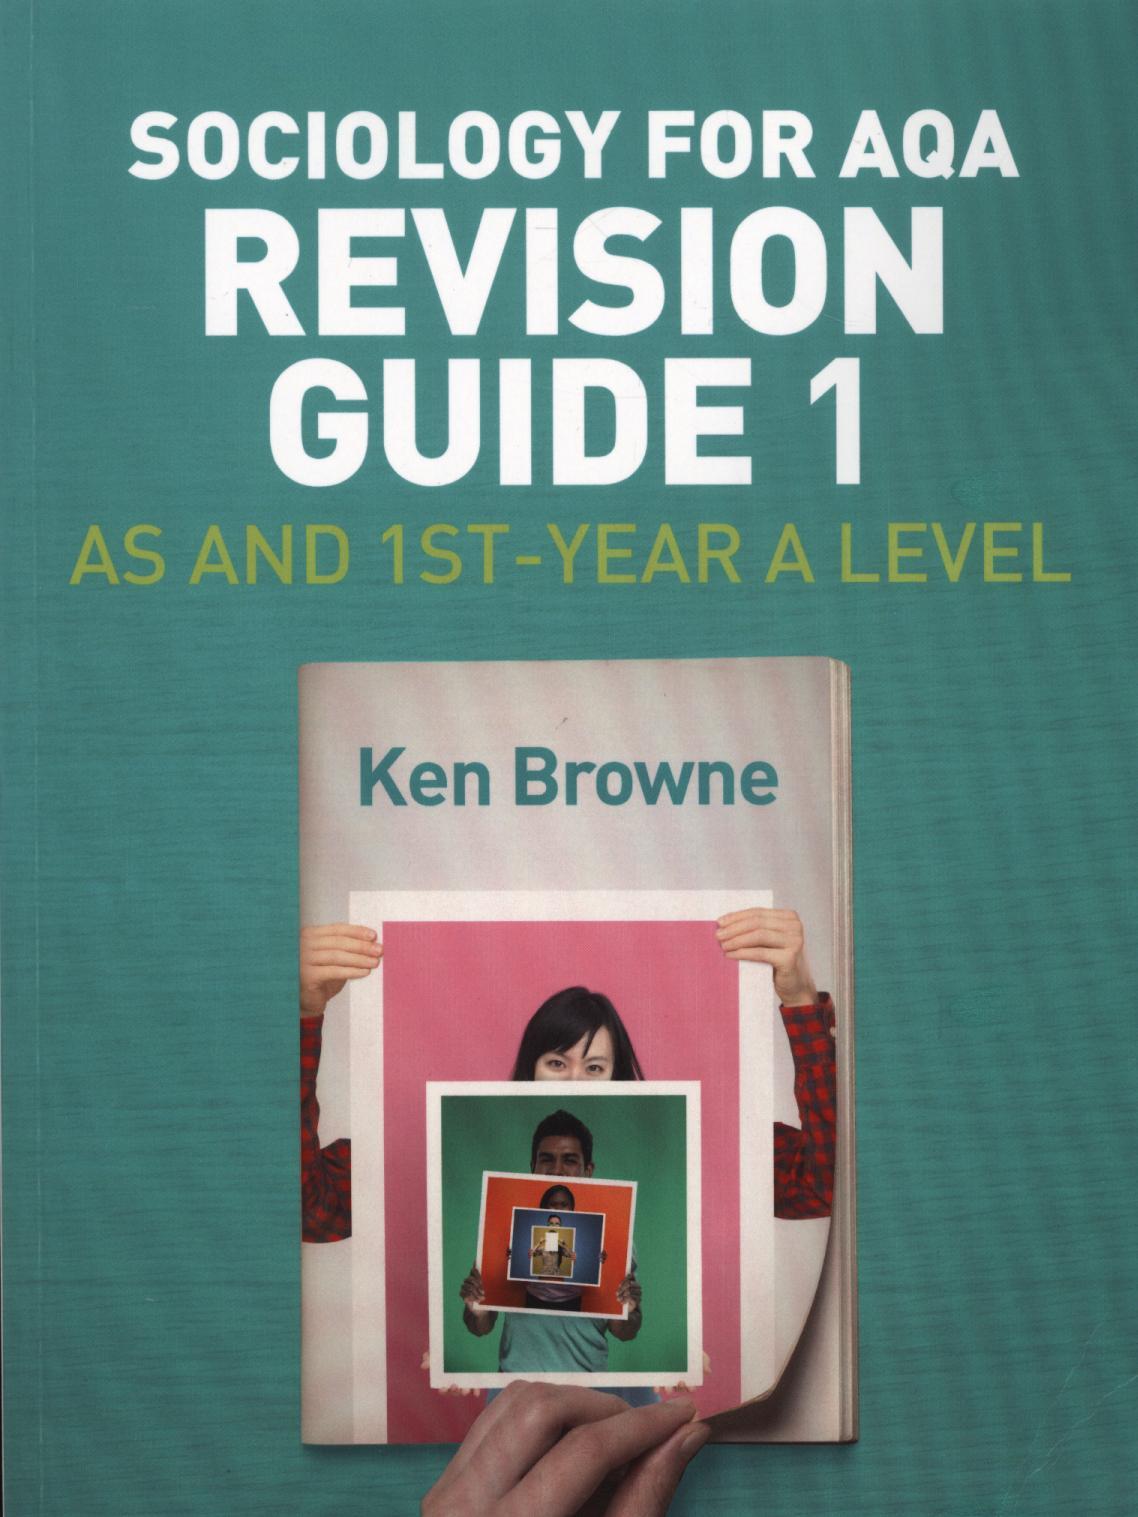 Sociology for AQA Revision Guide 1: AS and 1st-Year A Level